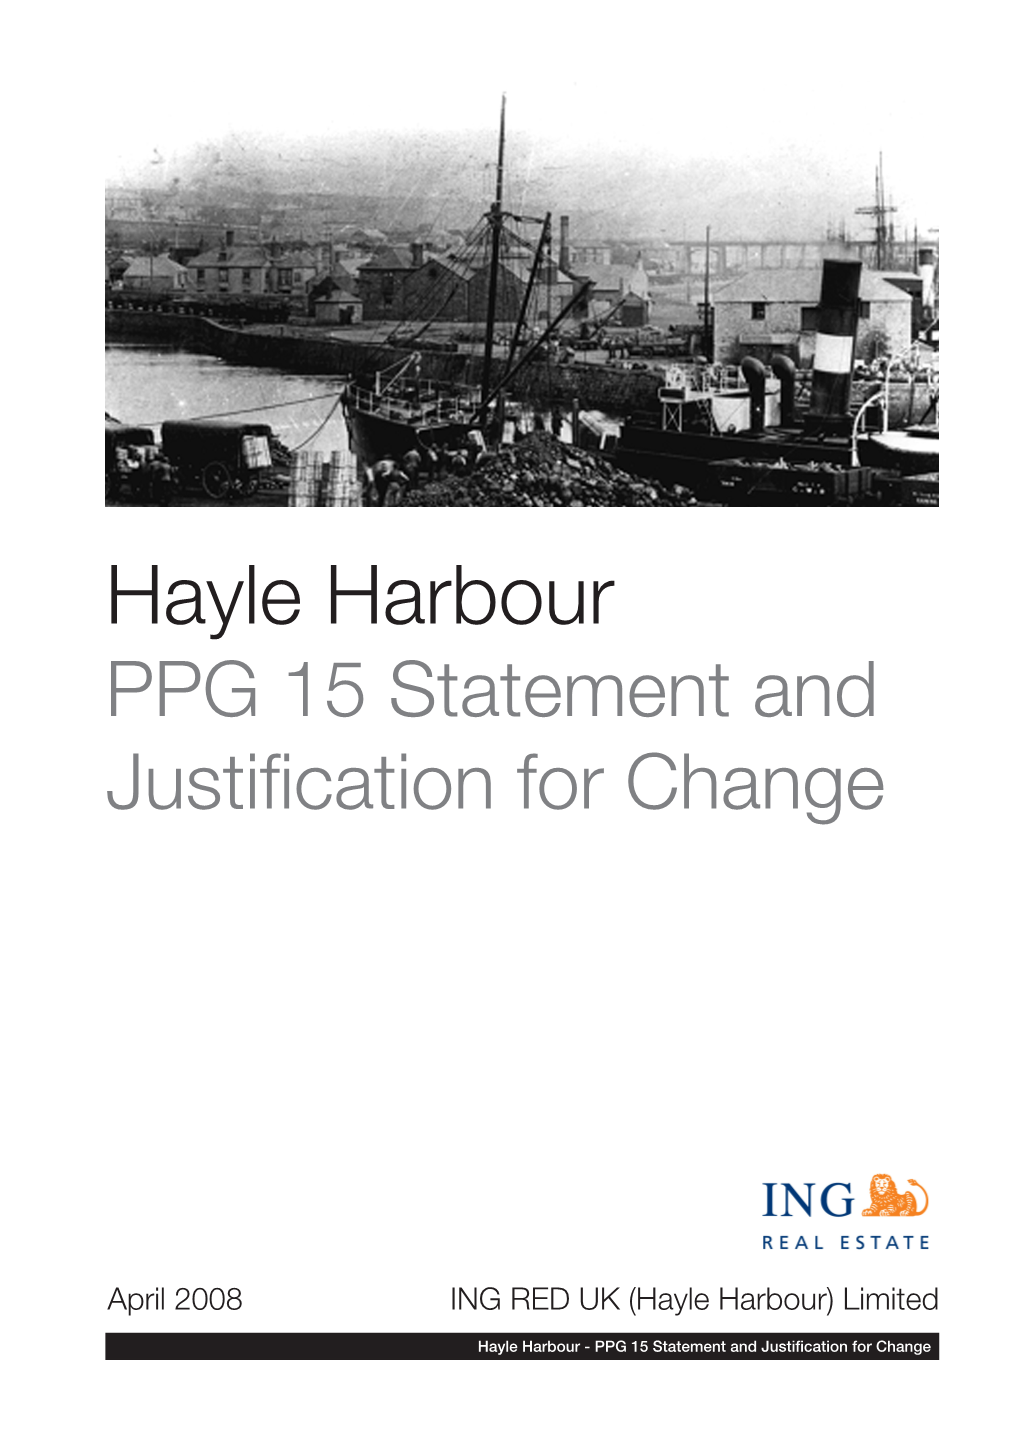 Hayle Harbour PPG 15 Statement and Justification for Change